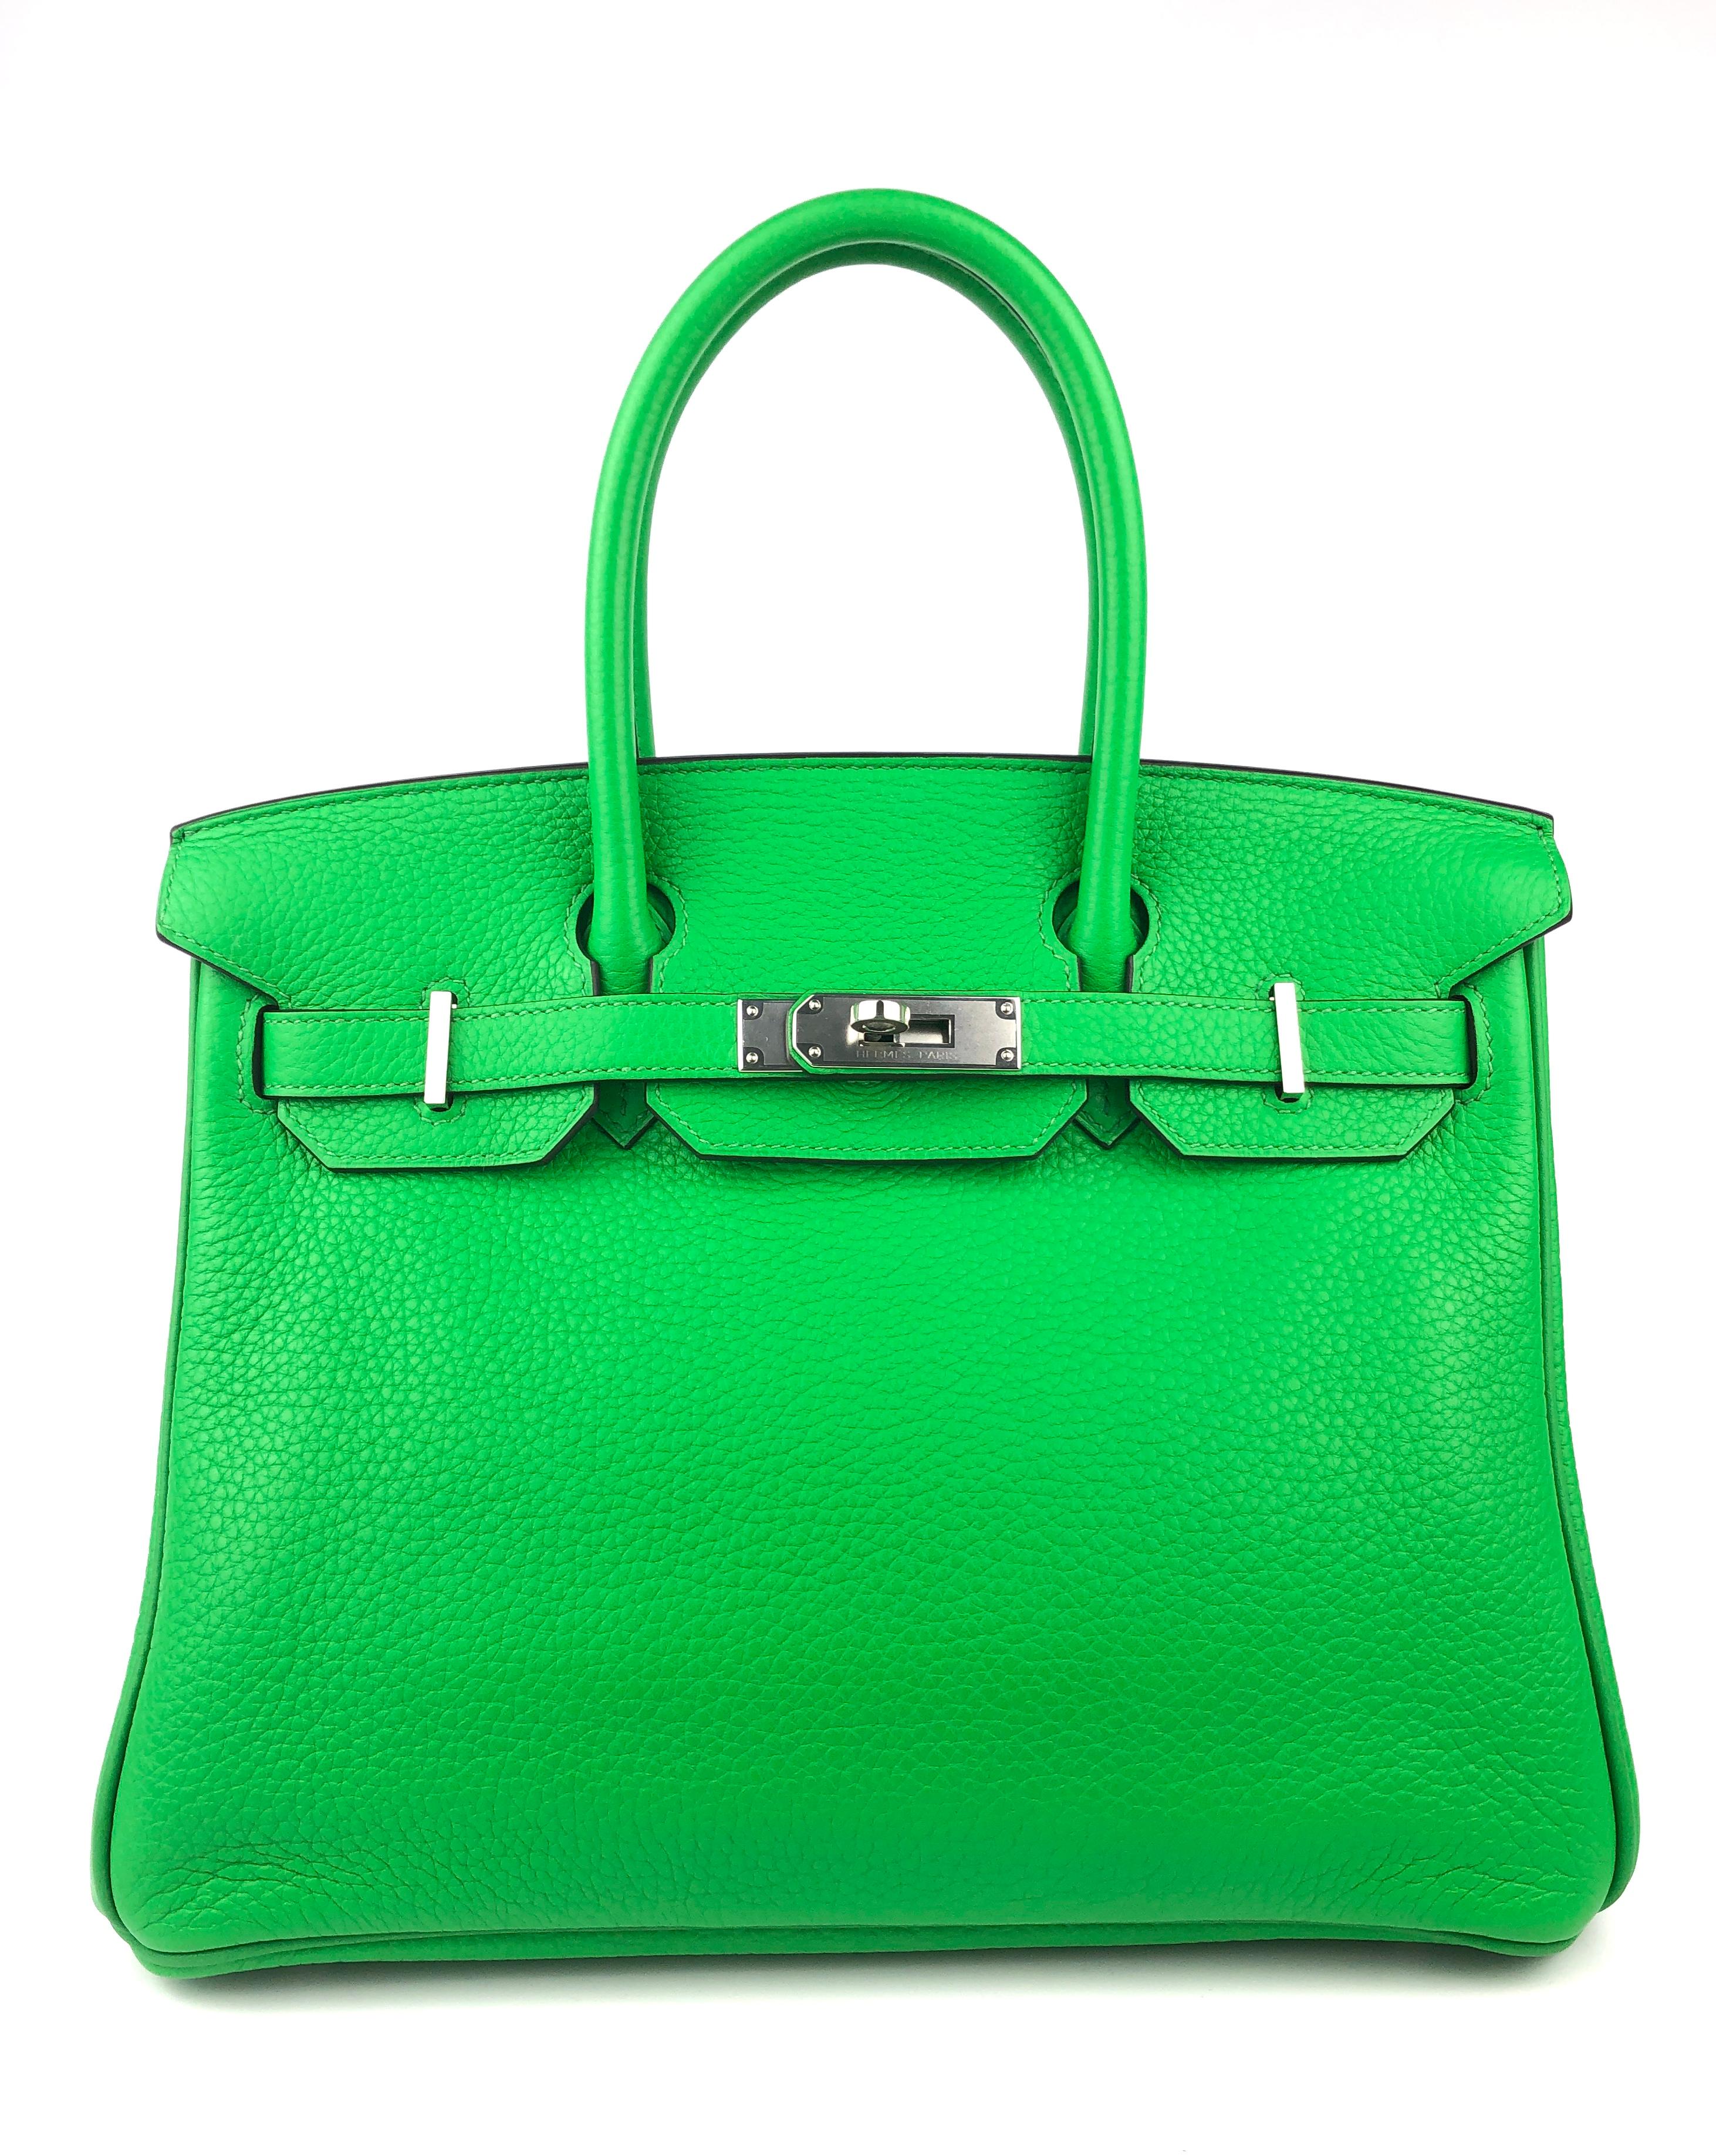 Stunning Hermes Birkin 30 Bamboo Green complimented by Palladium Hardware. Excellent Pristine Condition with Plastic on Hardware. 2014 R Stamp. 

Shop with Confidence from Lux Addicts. Authenticity Guaranteed! 